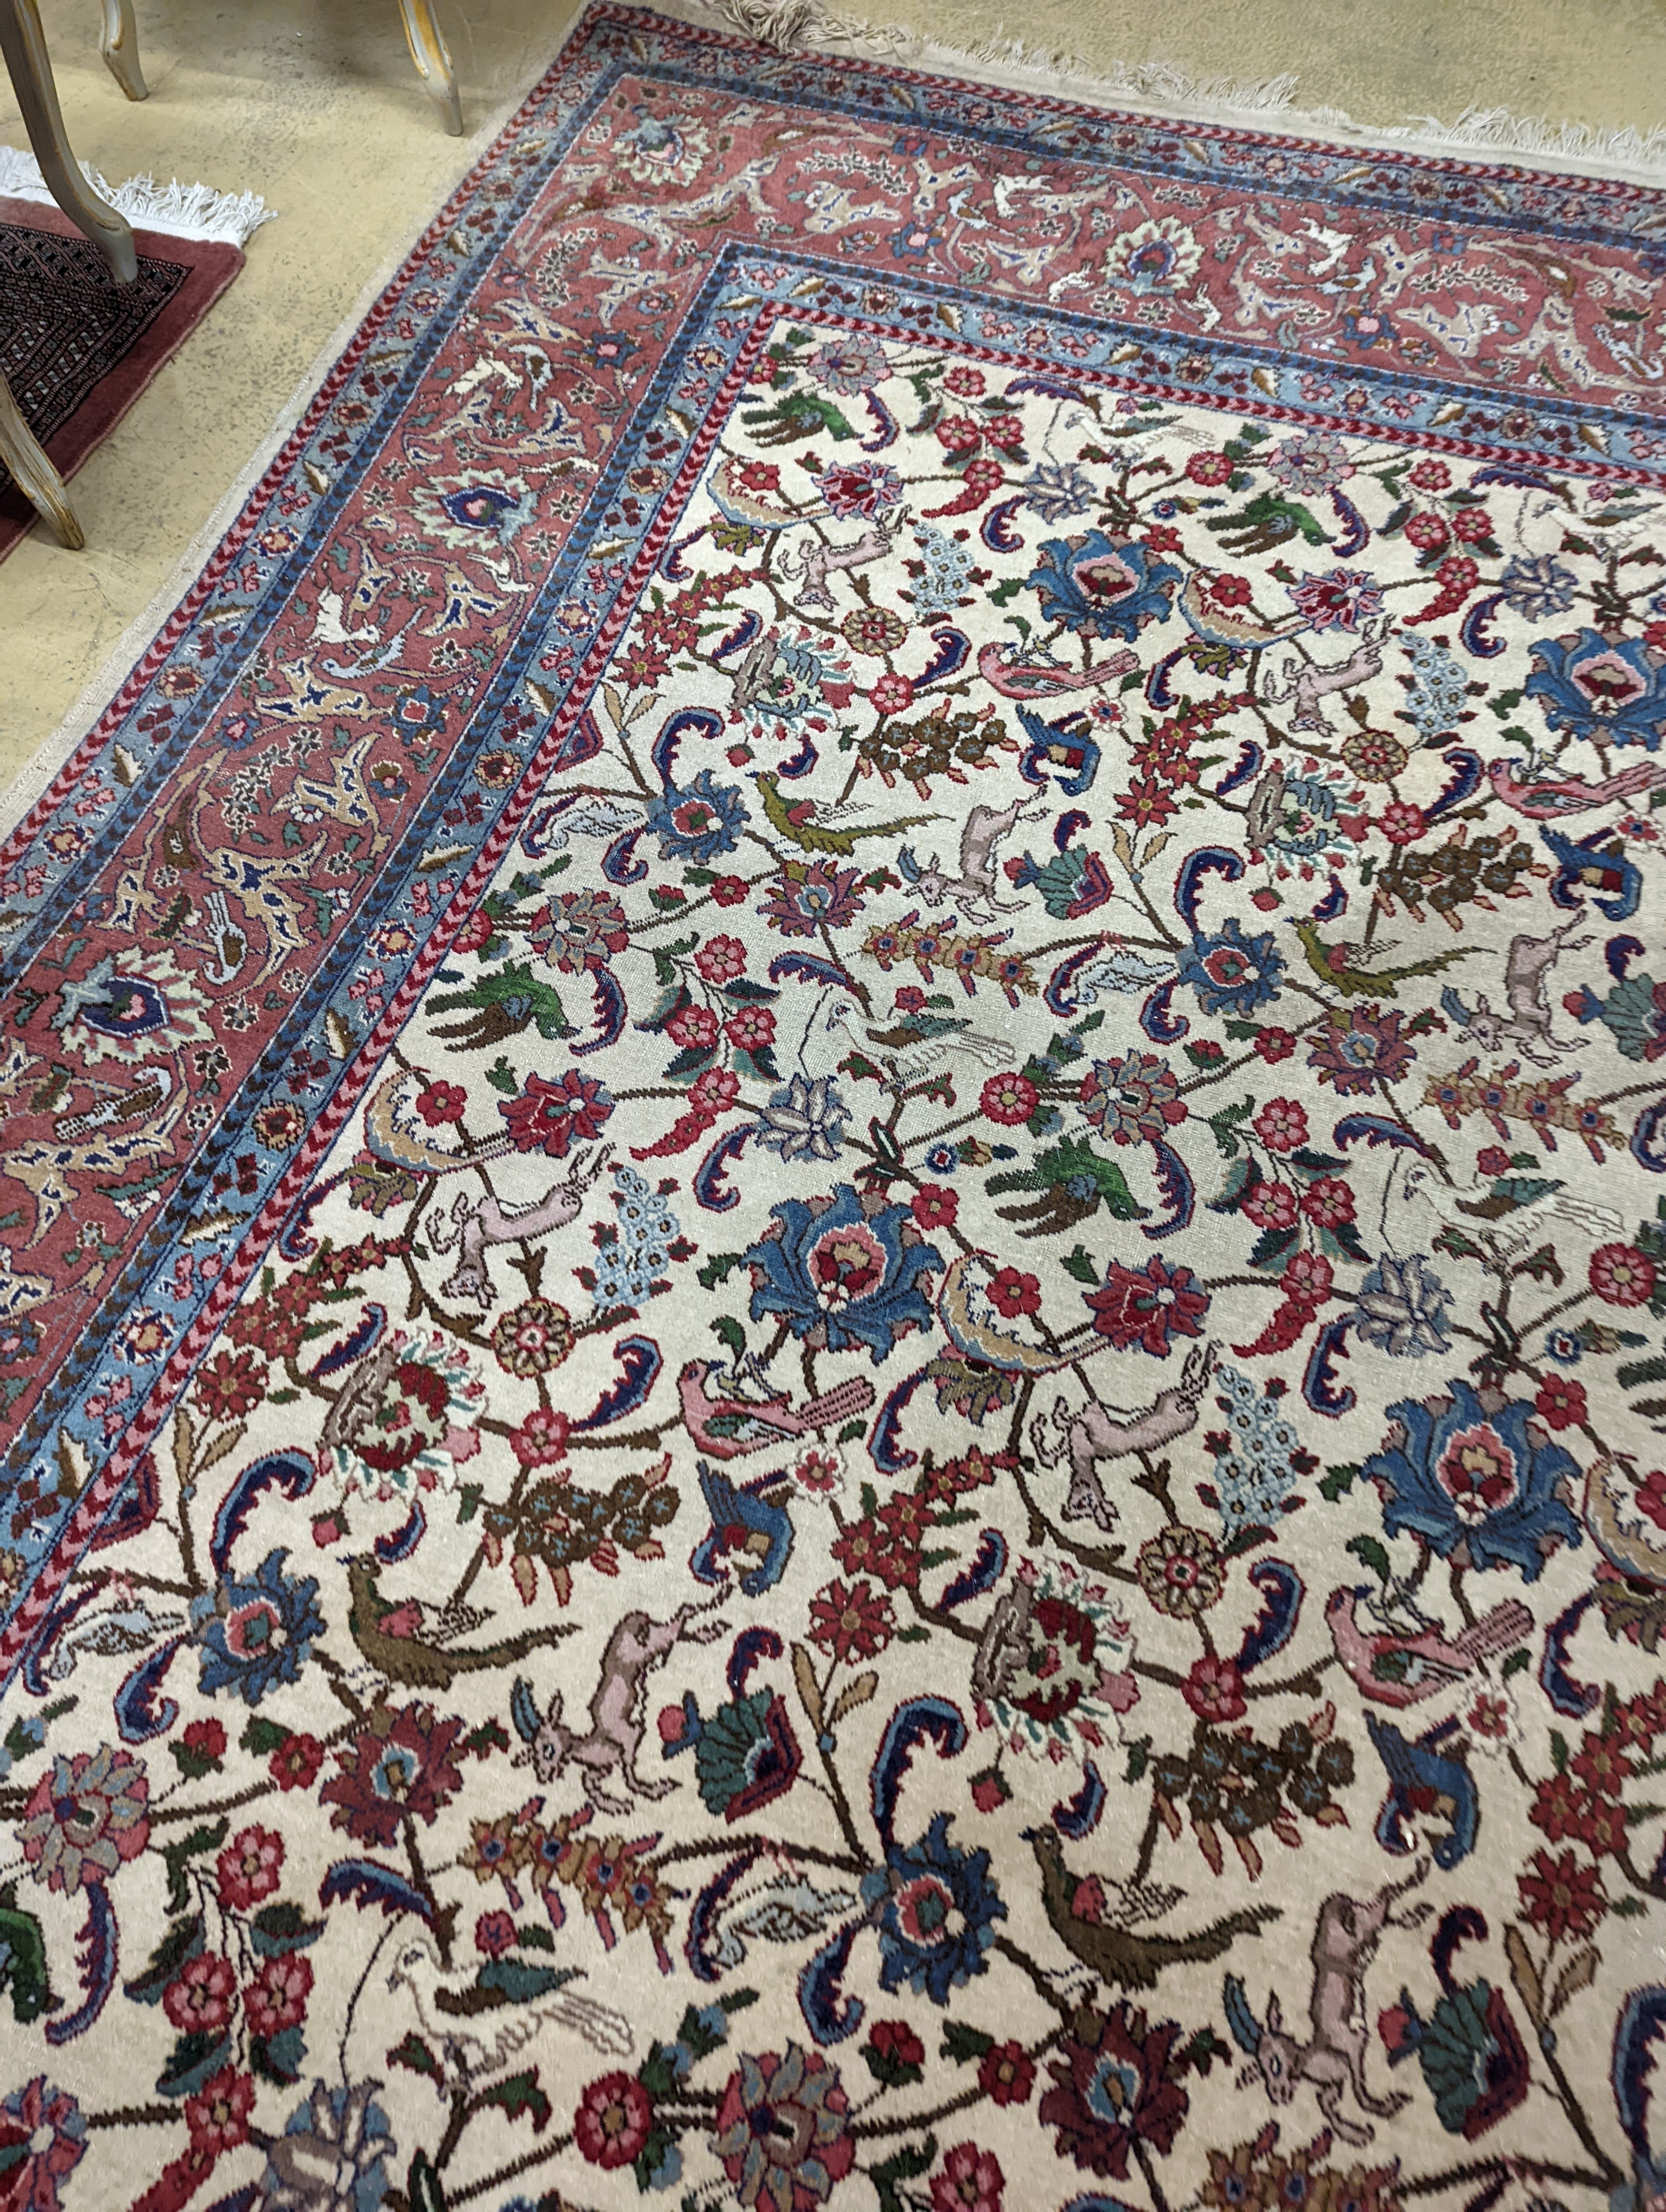 An Ispahan ivory ground carpet woven with flowers and animals, 386 x 276cm